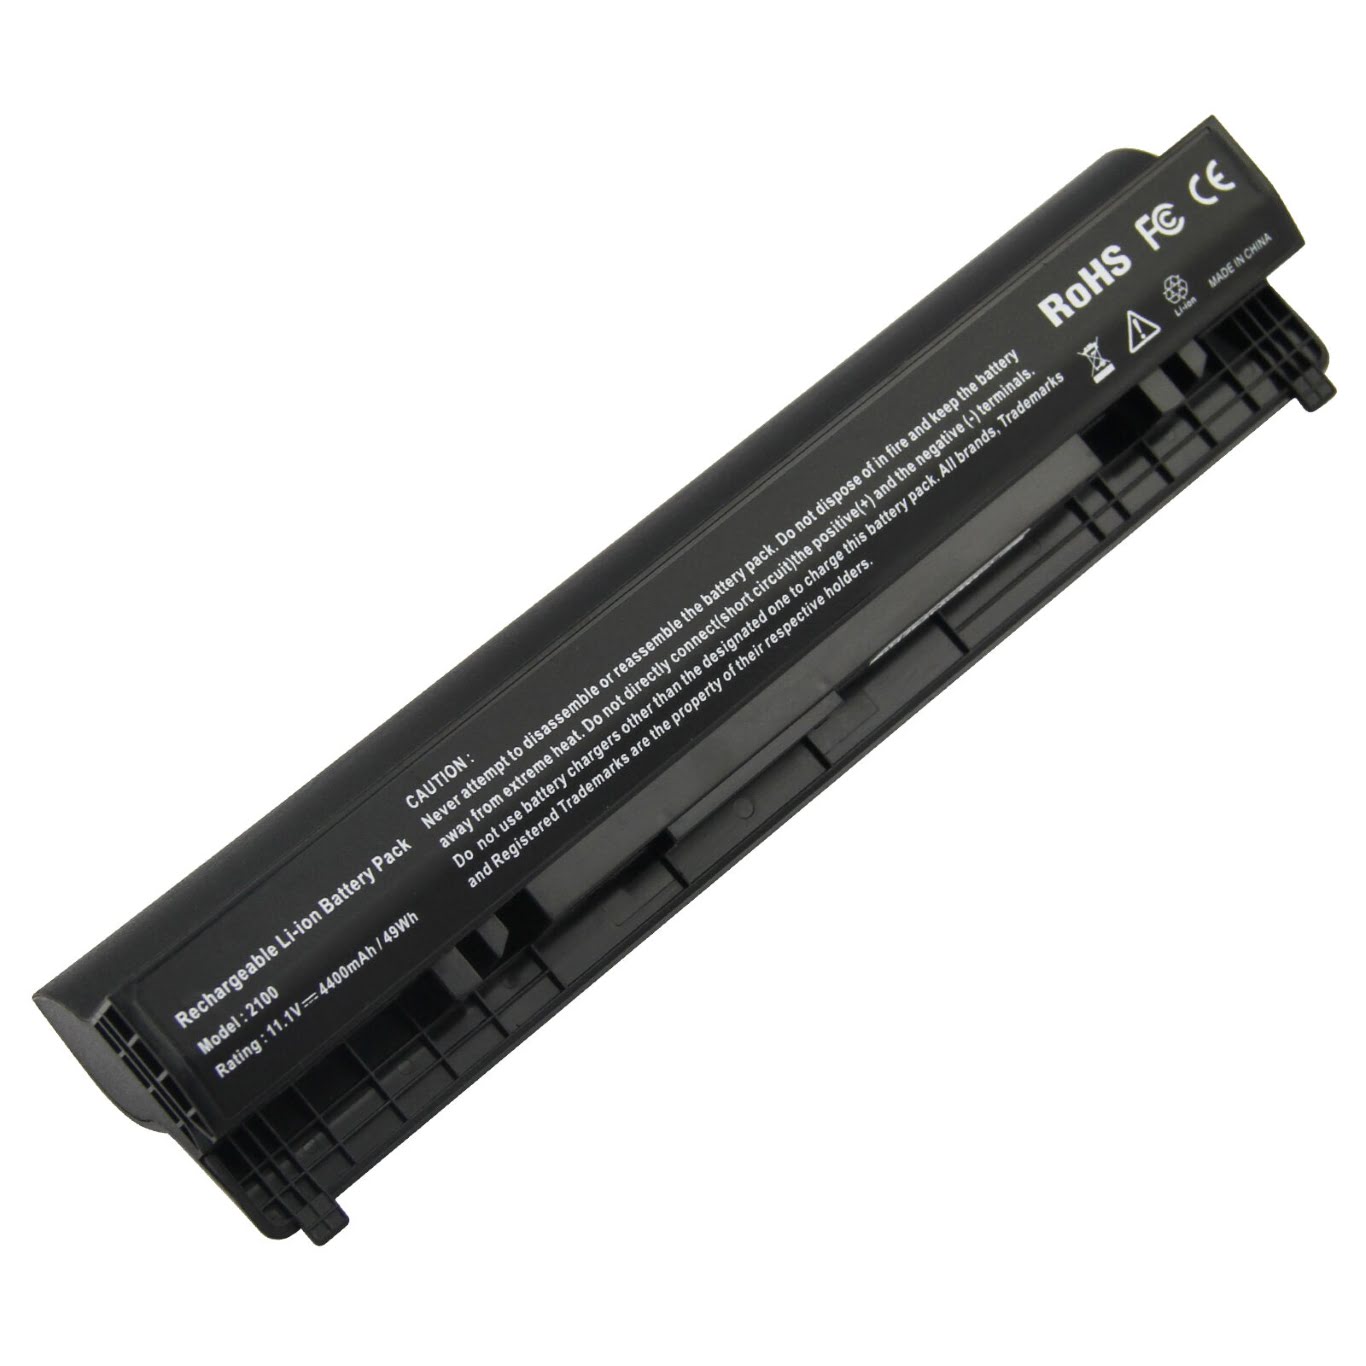 00R271, 01P255 replacement Laptop Battery for Dell Latitude 2100, Latitude 2110, 11.1 V, 6 cells, 5200 Mah